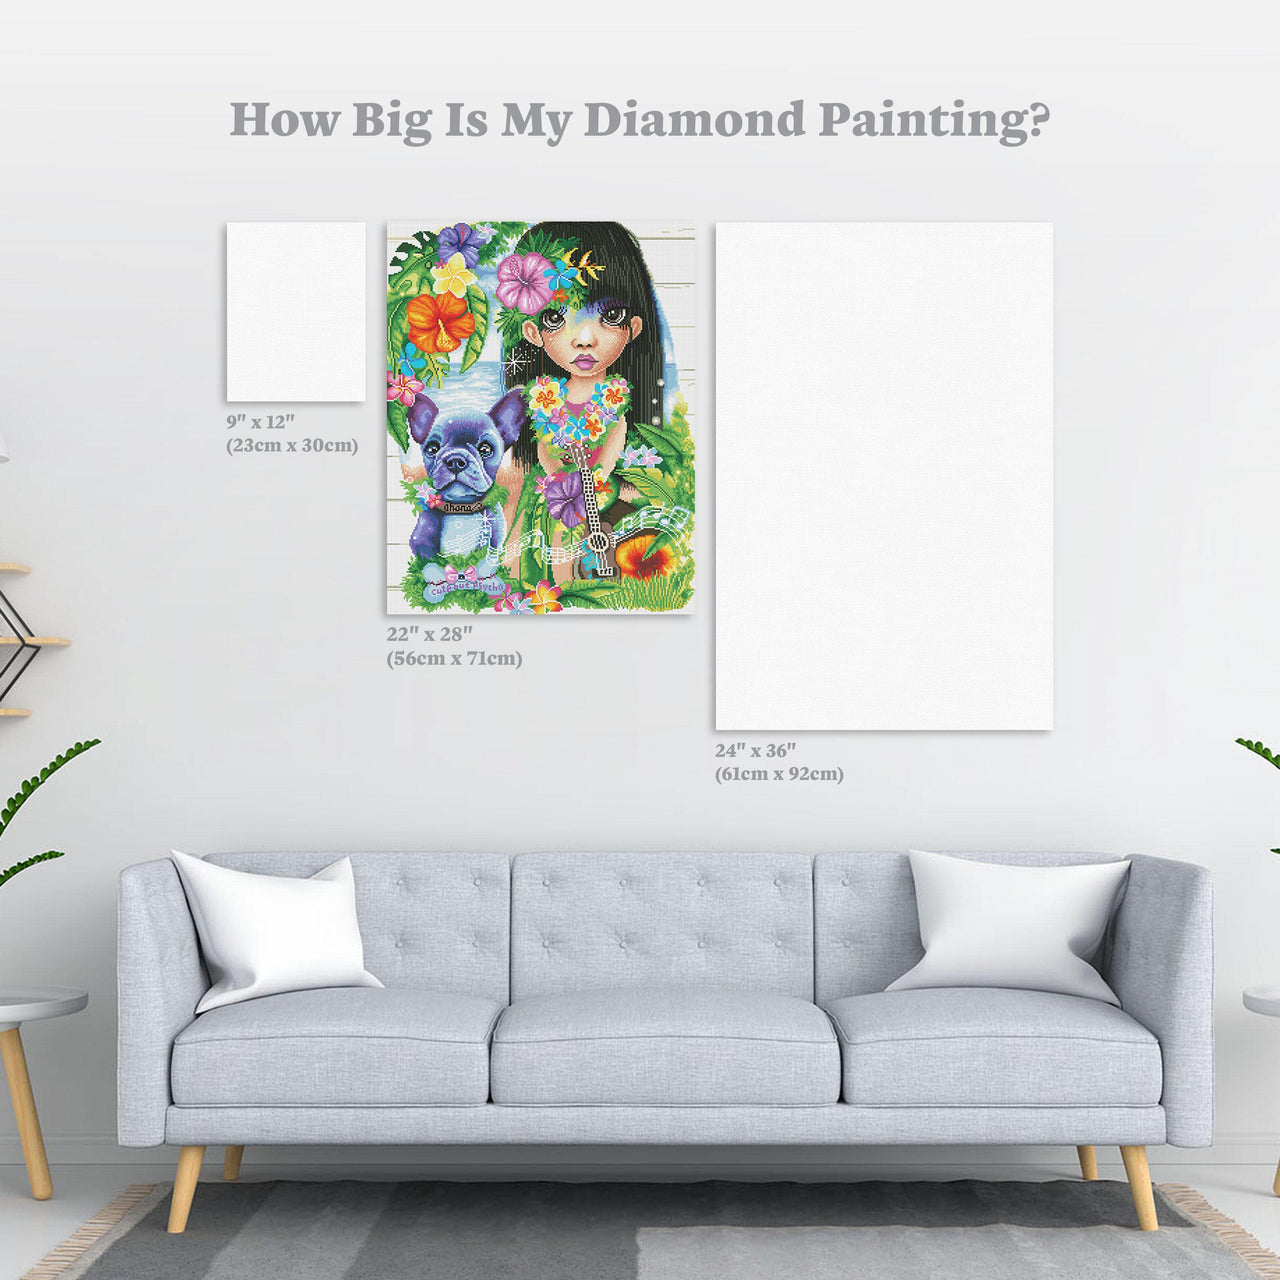 Diamond Painting A Hawaiian Girl And Her Dog 22" x 28″ (56cm x 71cm) / Square with 63 Colors including 3 ABs